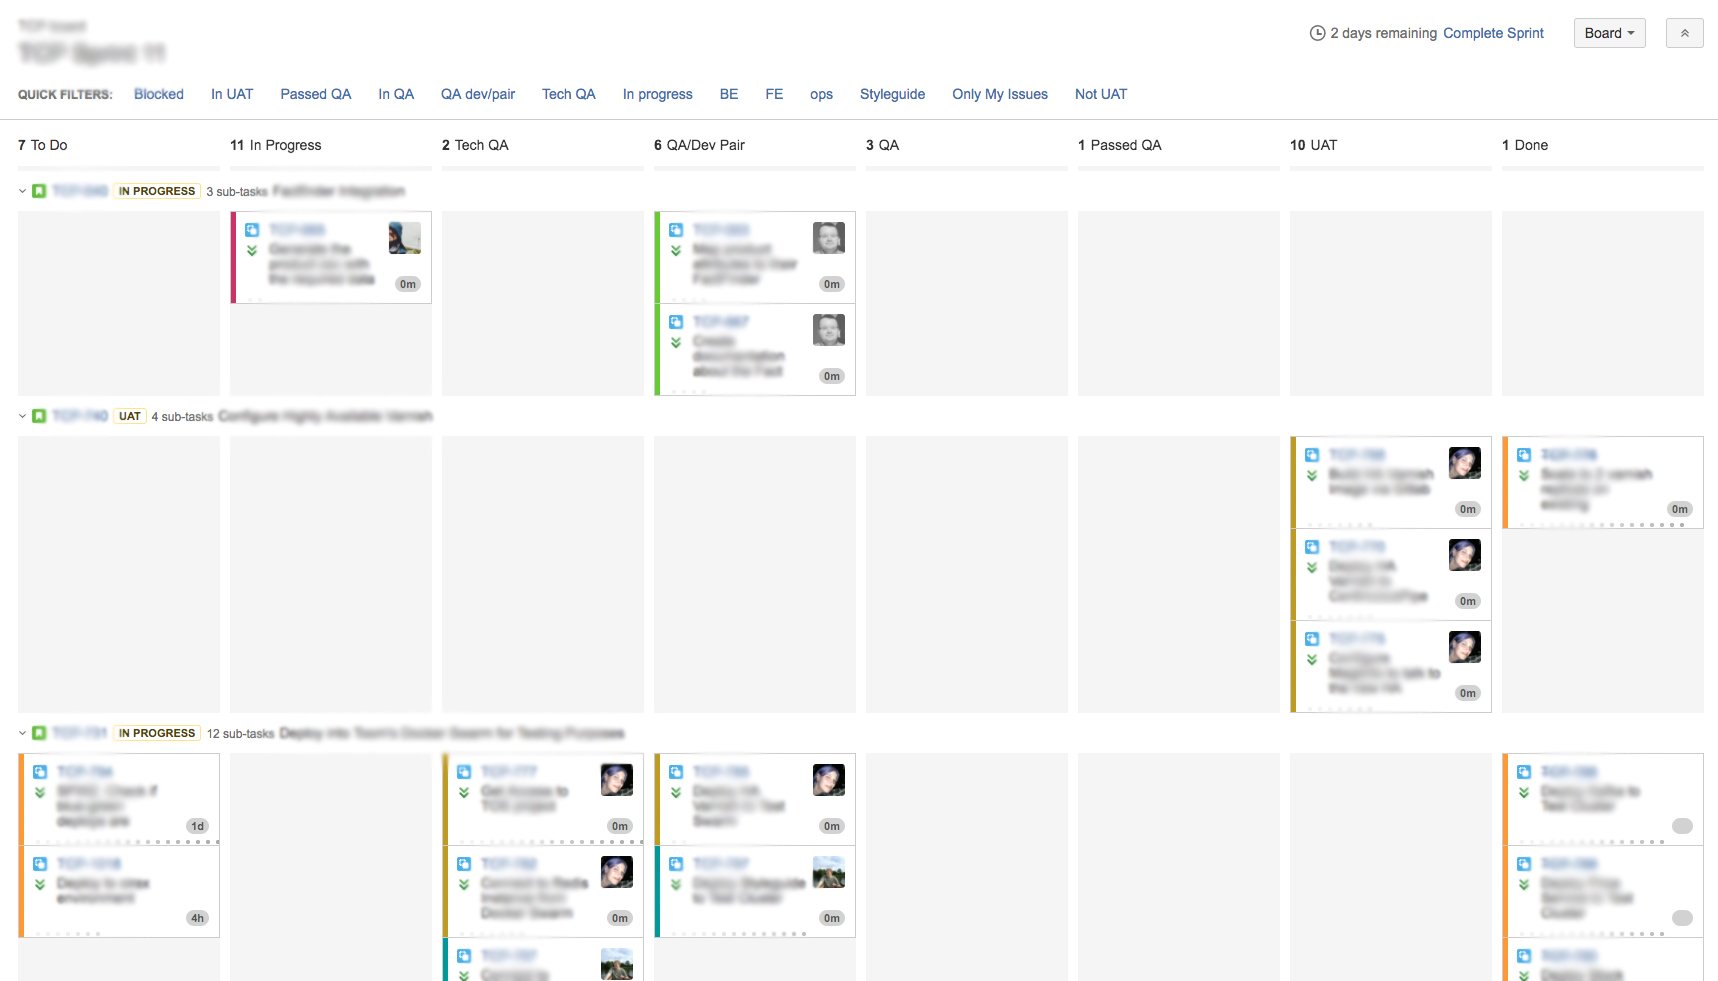 screenshot from Jira showing what a push system looks like